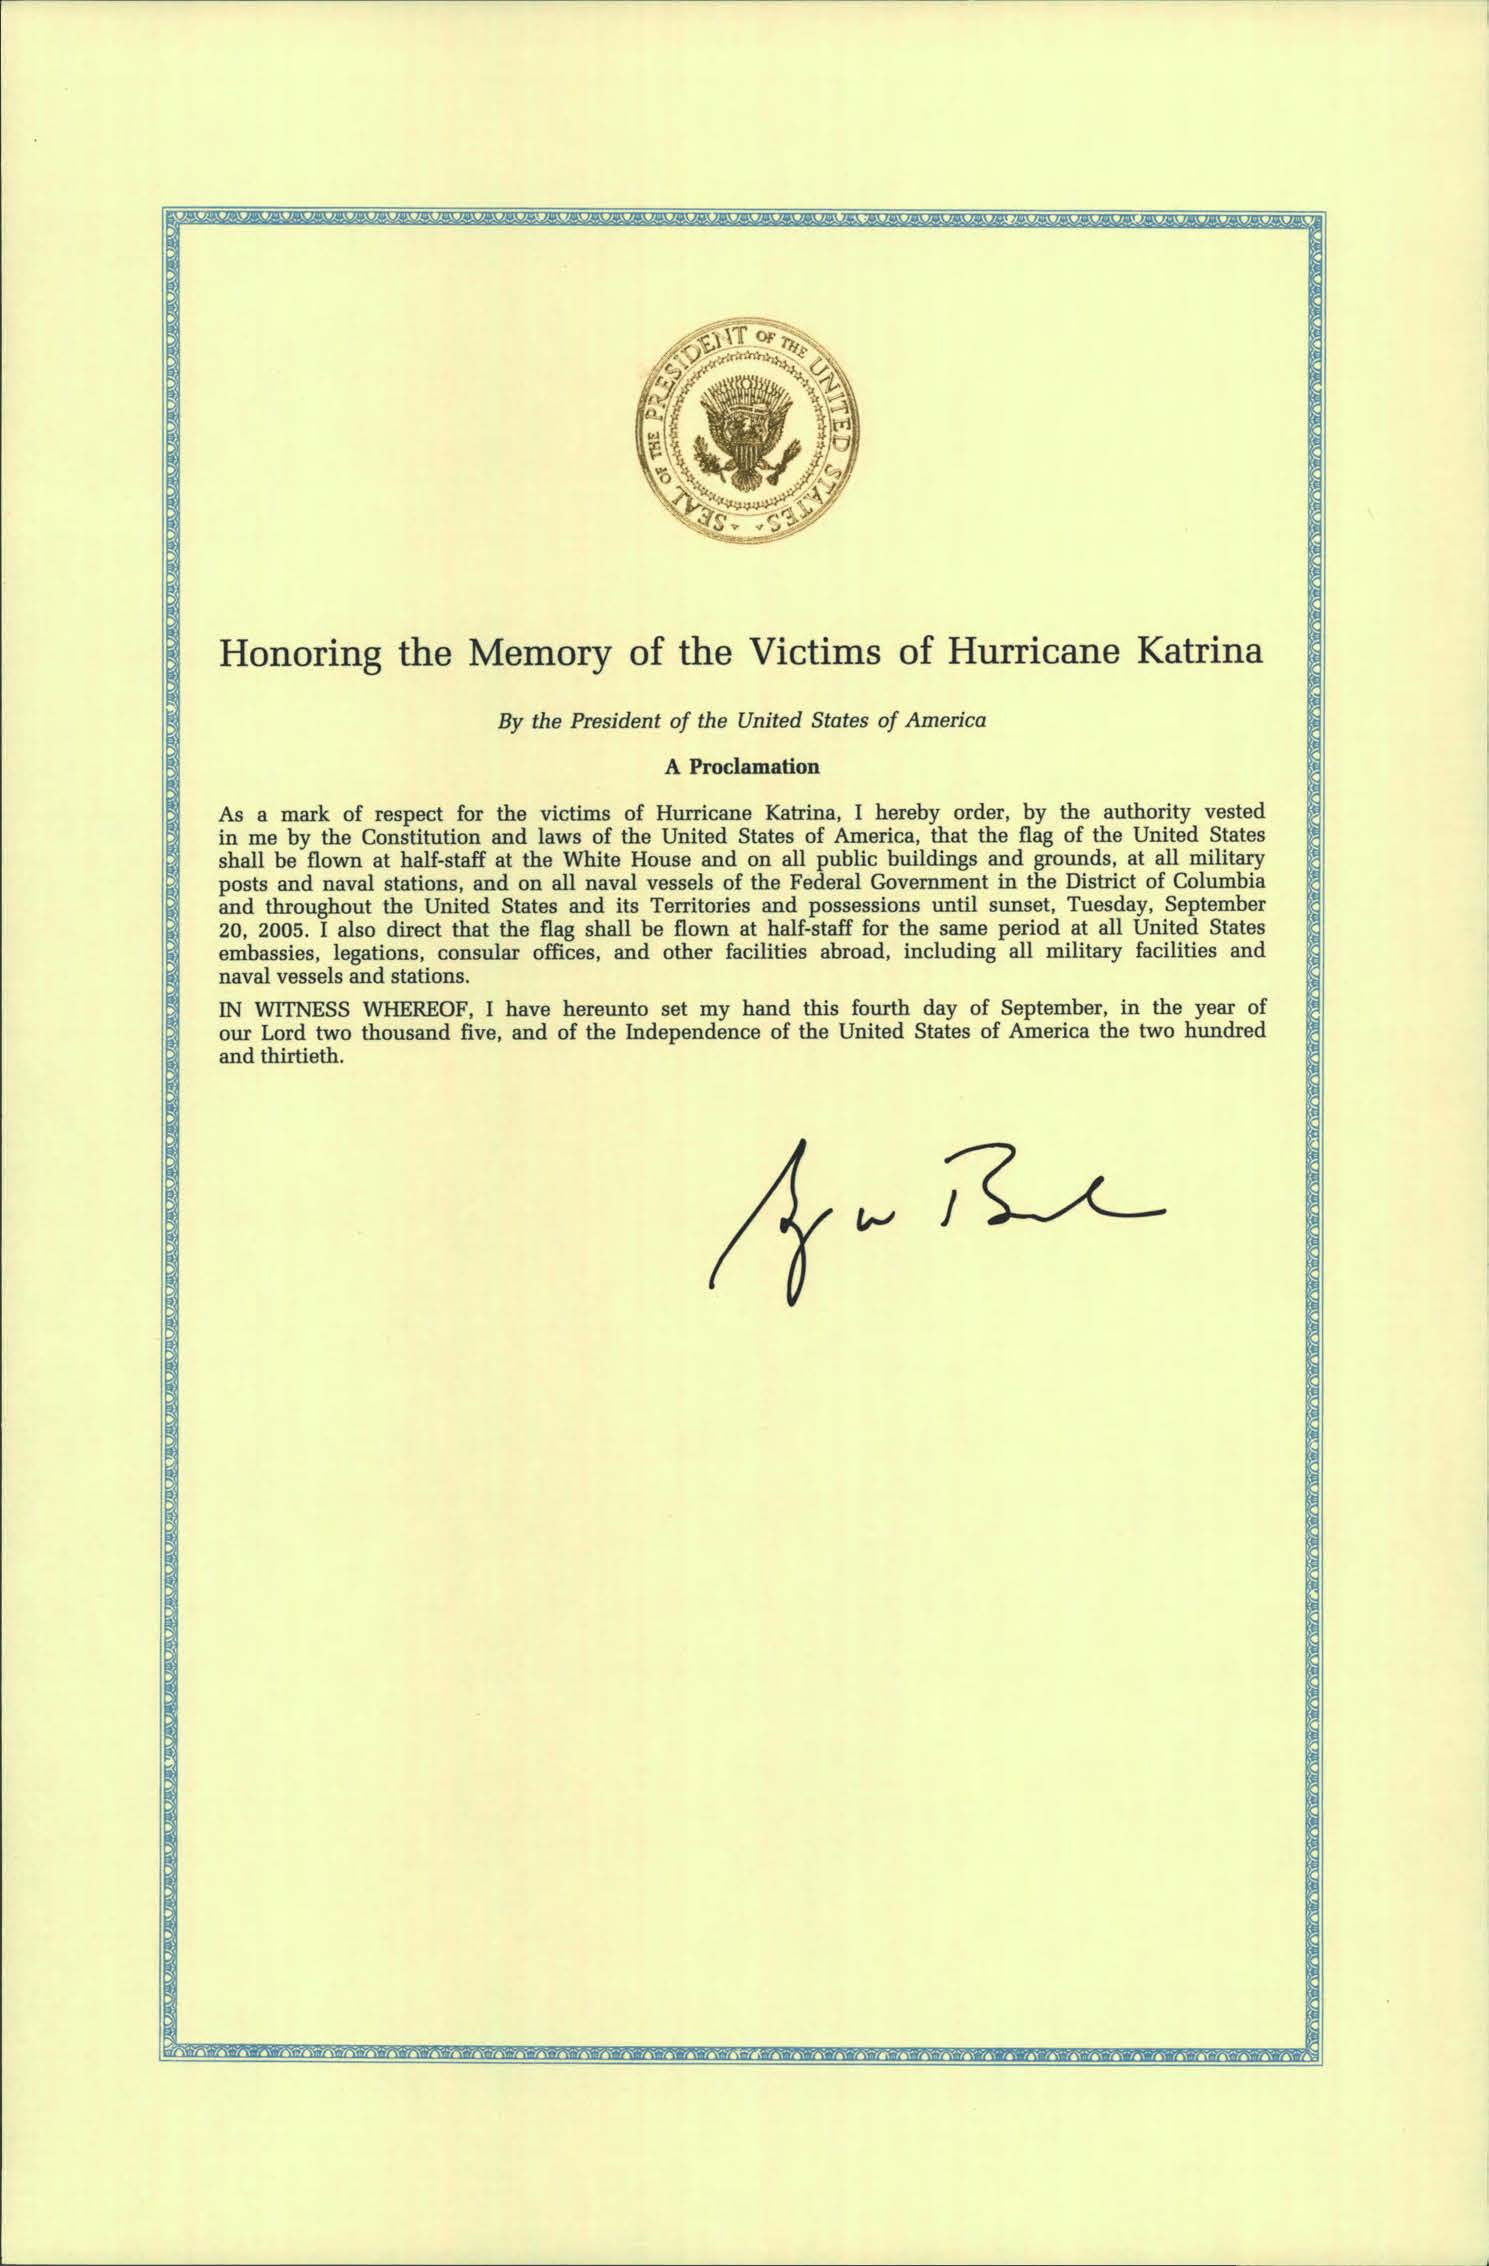 Proclamation honoring the memory of the victims of Hurricane Katrina on September 20, 2005.